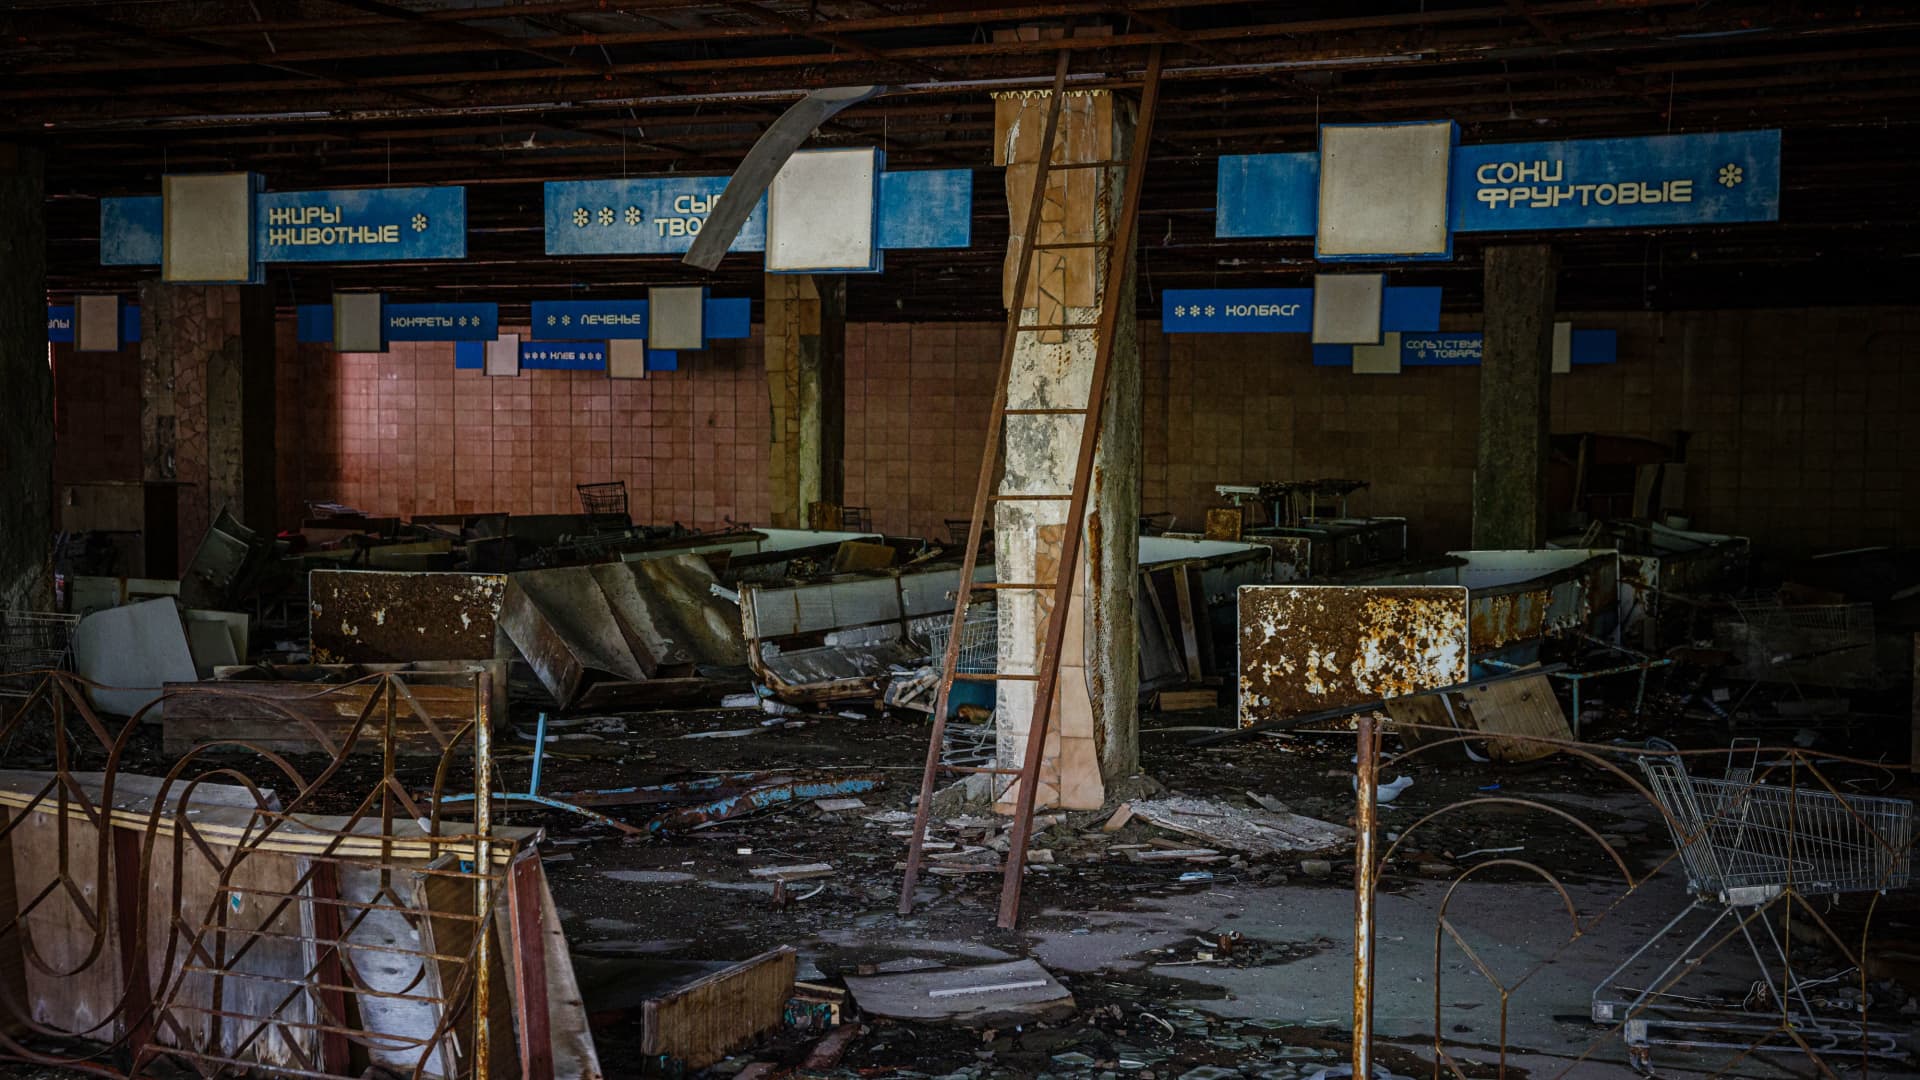 A photograph shows a supermarket in the ghost town of Pripyat near the Chornobyl Nuclear Power Plant on May 29, 2022, amid the Russian invasion of Ukraine.